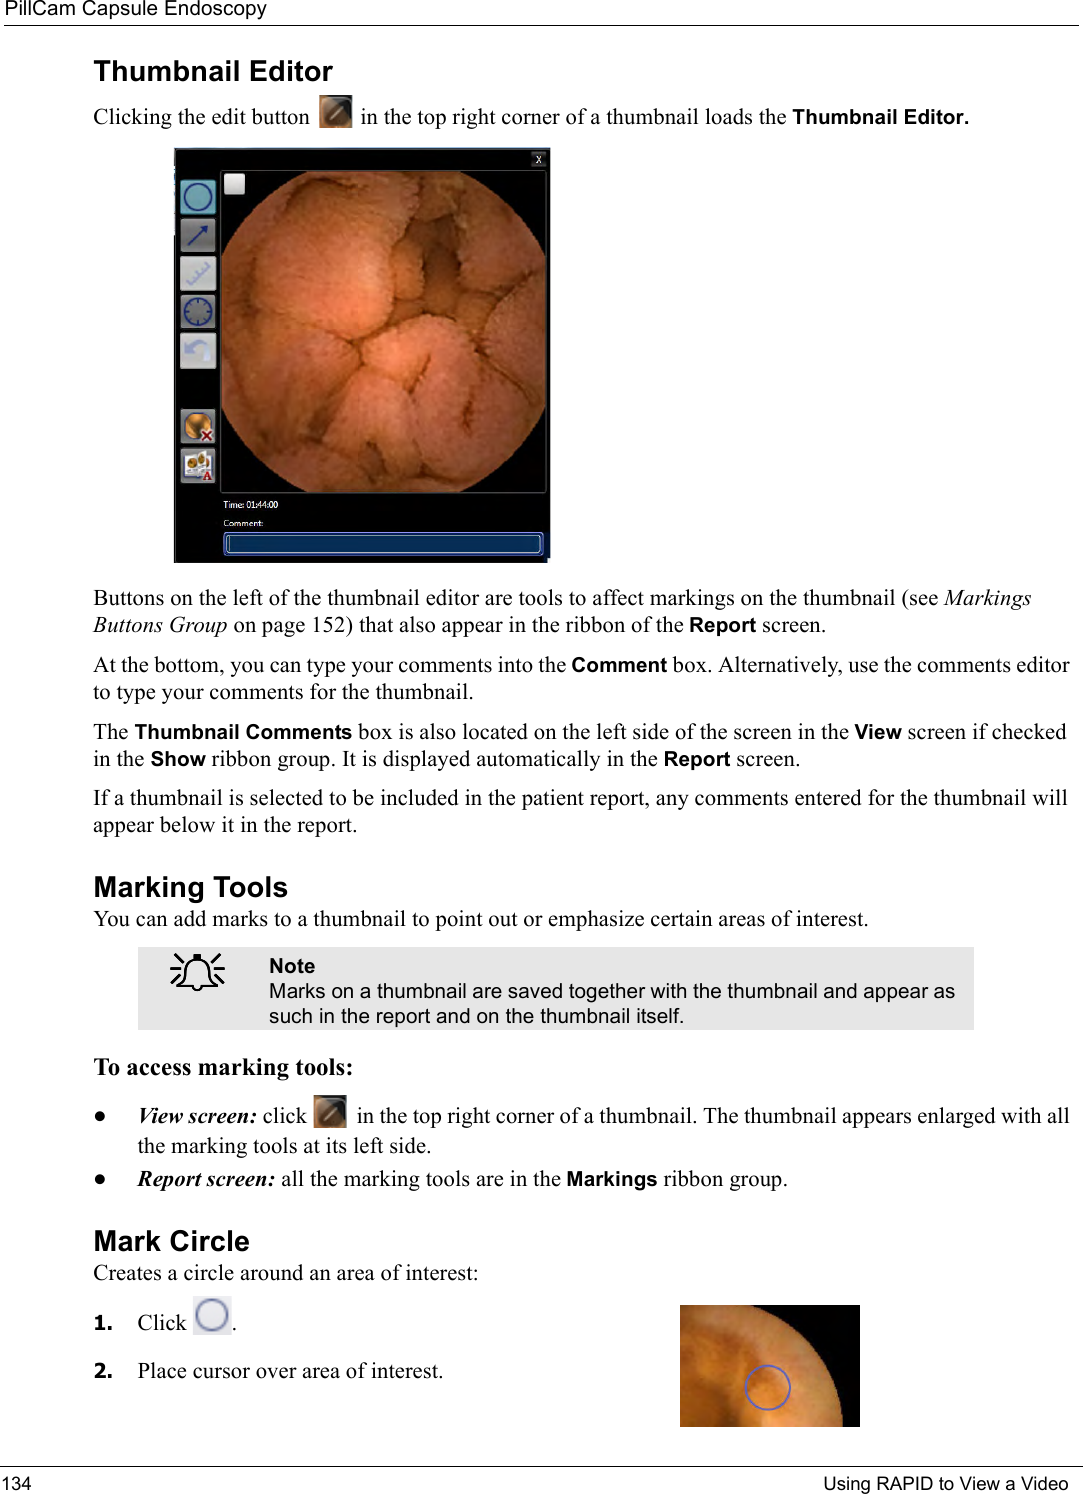 PillCam Capsule Endoscopy134 Using RAPID to View a VideoThumbnail EditorClicking the edit button   in the top right corner of a thumbnail loads the Thumbnail Editor.Buttons on the left of the thumbnail editor are tools to affect markings on the thumbnail (see Markings Buttons Group on page 152) that also appear in the ribbon of the Report screen.At the bottom, you can type your comments into the Comment box. Alternatively, use the comments editor to type your comments for the thumbnail. The Thumbnail Comments box is also located on the left side of the screen in the View screen if checked in the Show ribbon group. It is displayed automatically in the Report screen. If a thumbnail is selected to be included in the patient report, any comments entered for the thumbnail will appear below it in the report.Marking ToolsYou can add marks to a thumbnail to point out or emphasize certain areas of interest.  To access marking tools:•View screen: click   in the top right corner of a thumbnail. The thumbnail appears enlarged with all the marking tools at its left side.•Report screen: all the marking tools are in the Markings ribbon group.Mark Circle Creates a circle around an area of interest:1. Click  .2. Place cursor over area of interest. ֠֠֠֠NoteMarks on a thumbnail are saved together with the thumbnail and appear as such in the report and on the thumbnail itself.